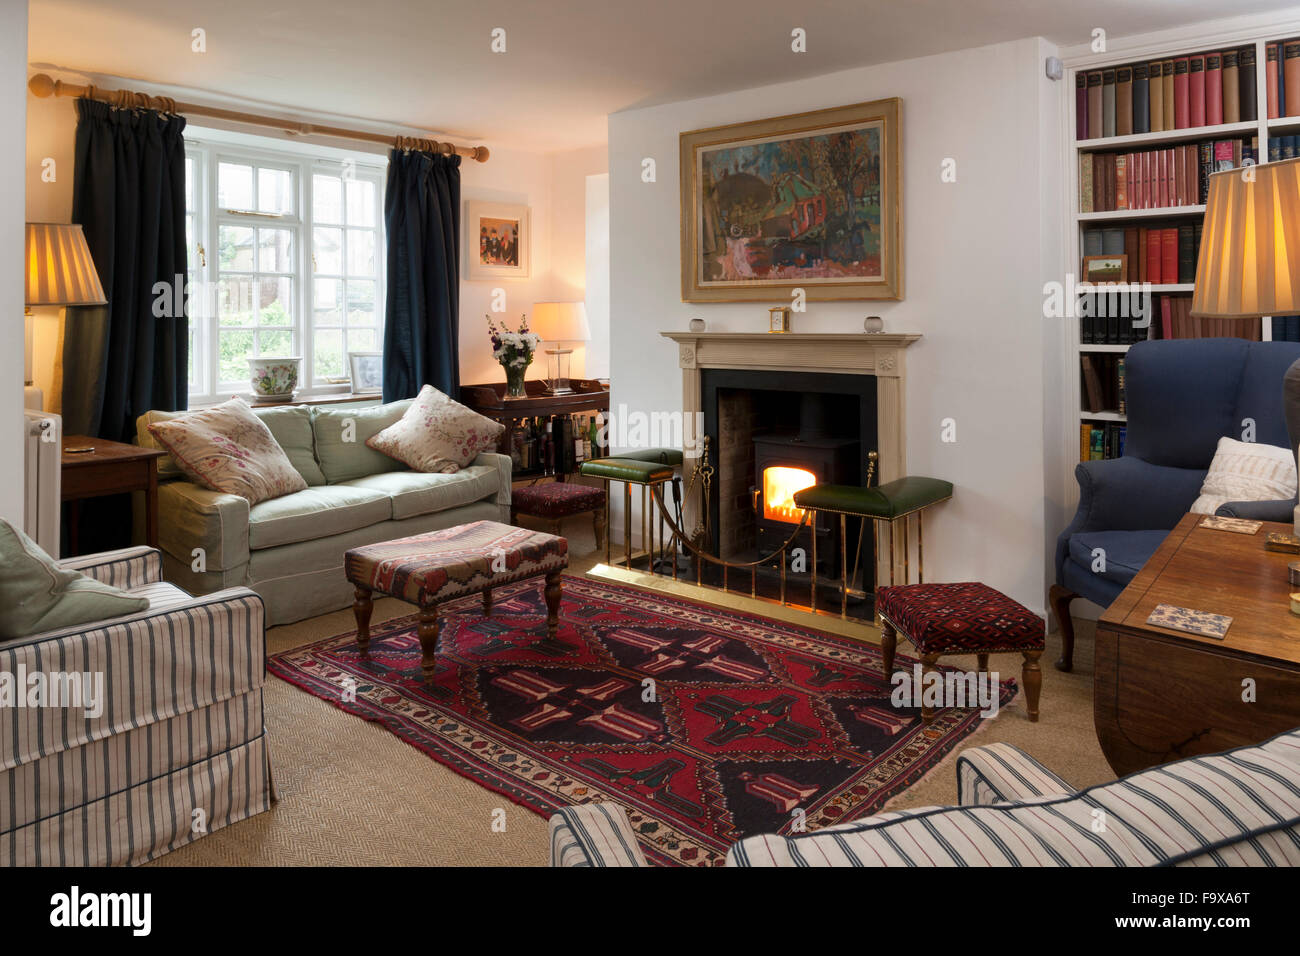 Very traditional sitting room. Stock Photo